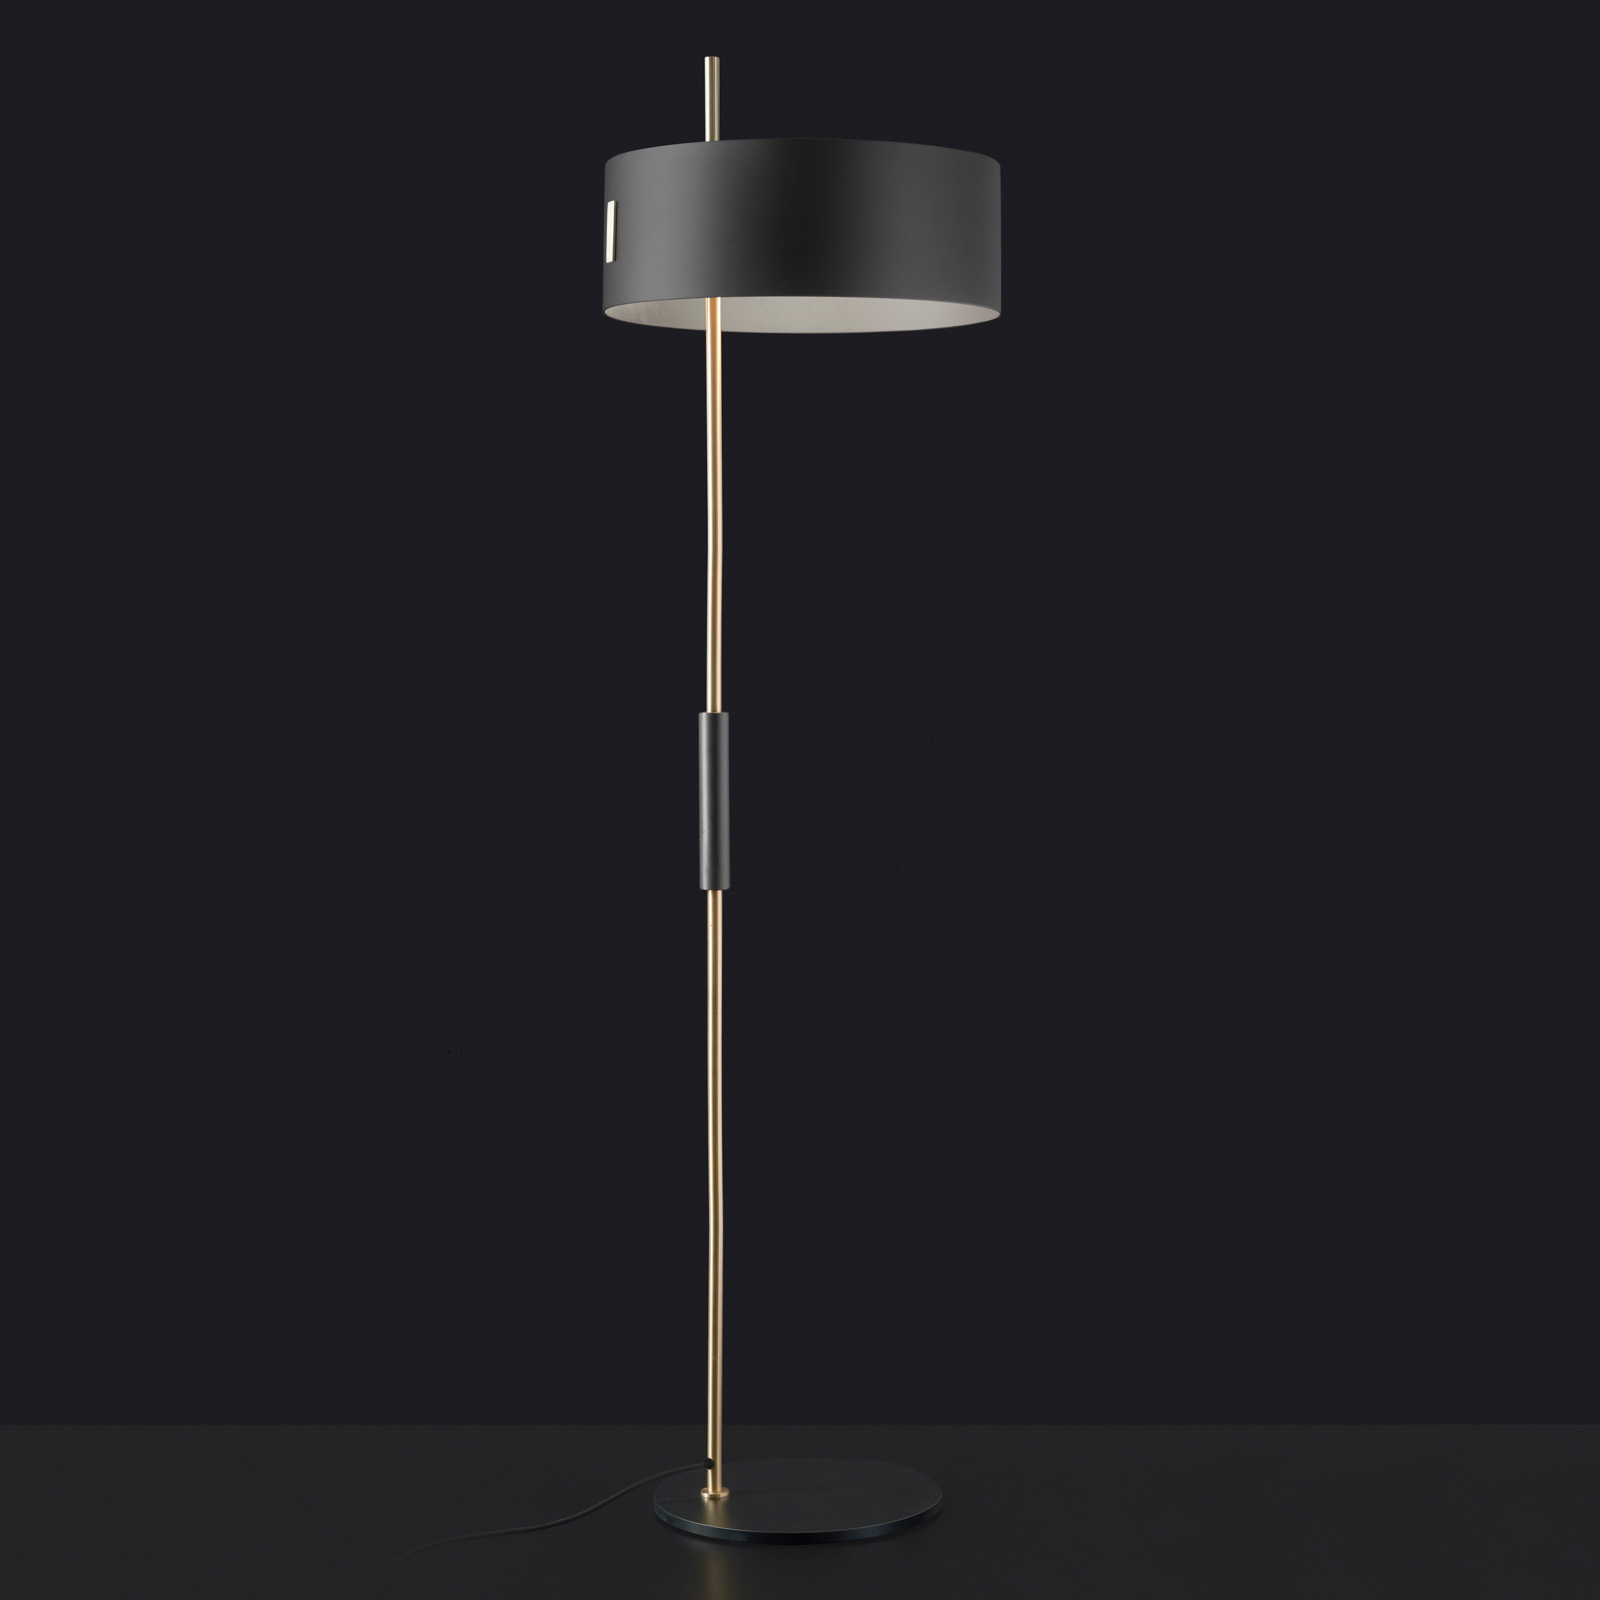 Oluce 1953 floor lamp in black and gold